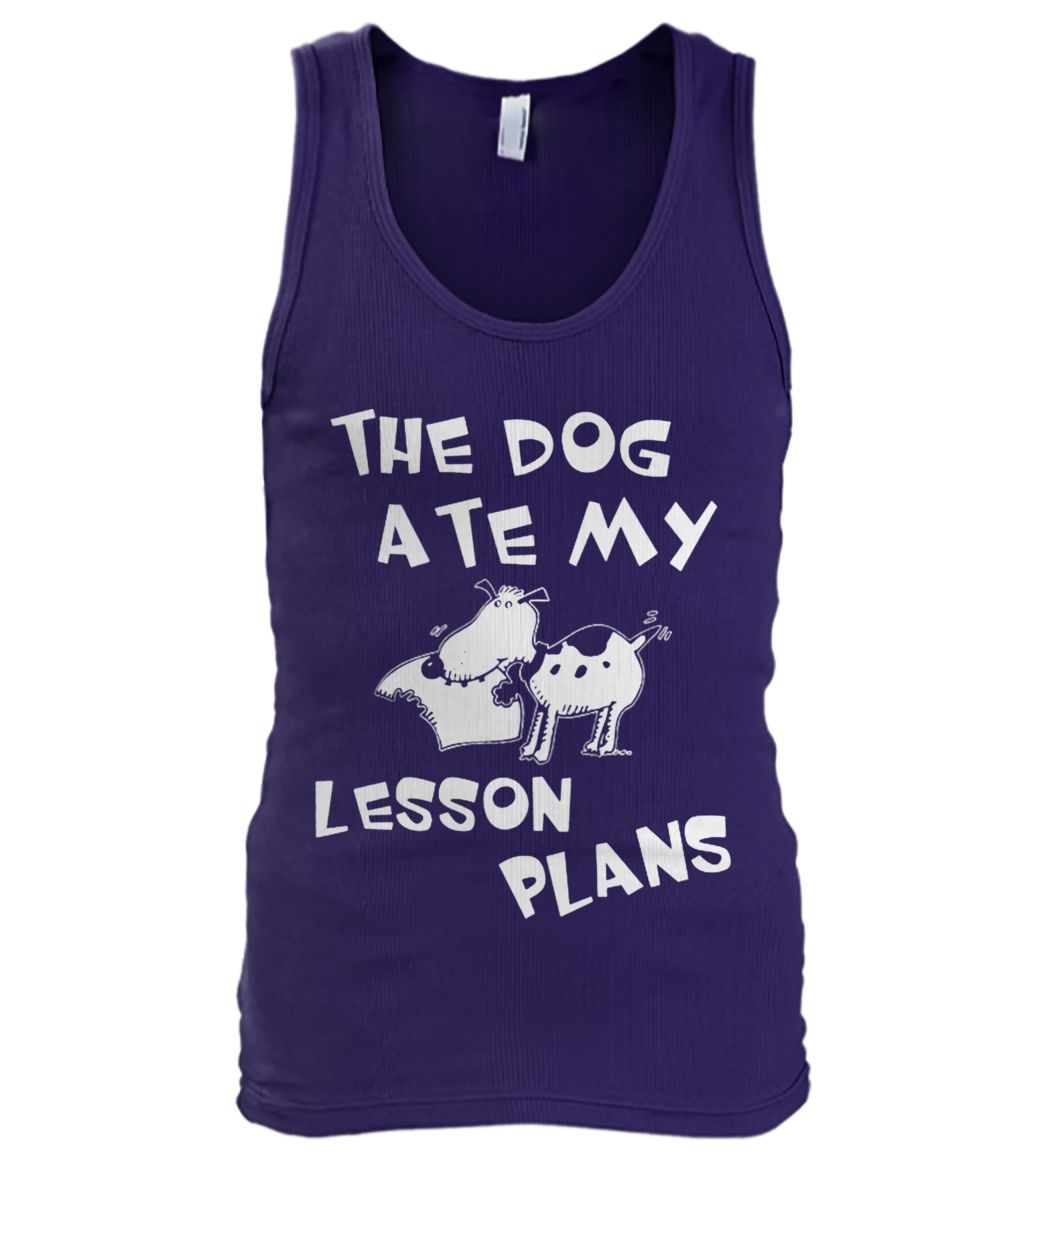 The dog ate my lesson plans men's tank top